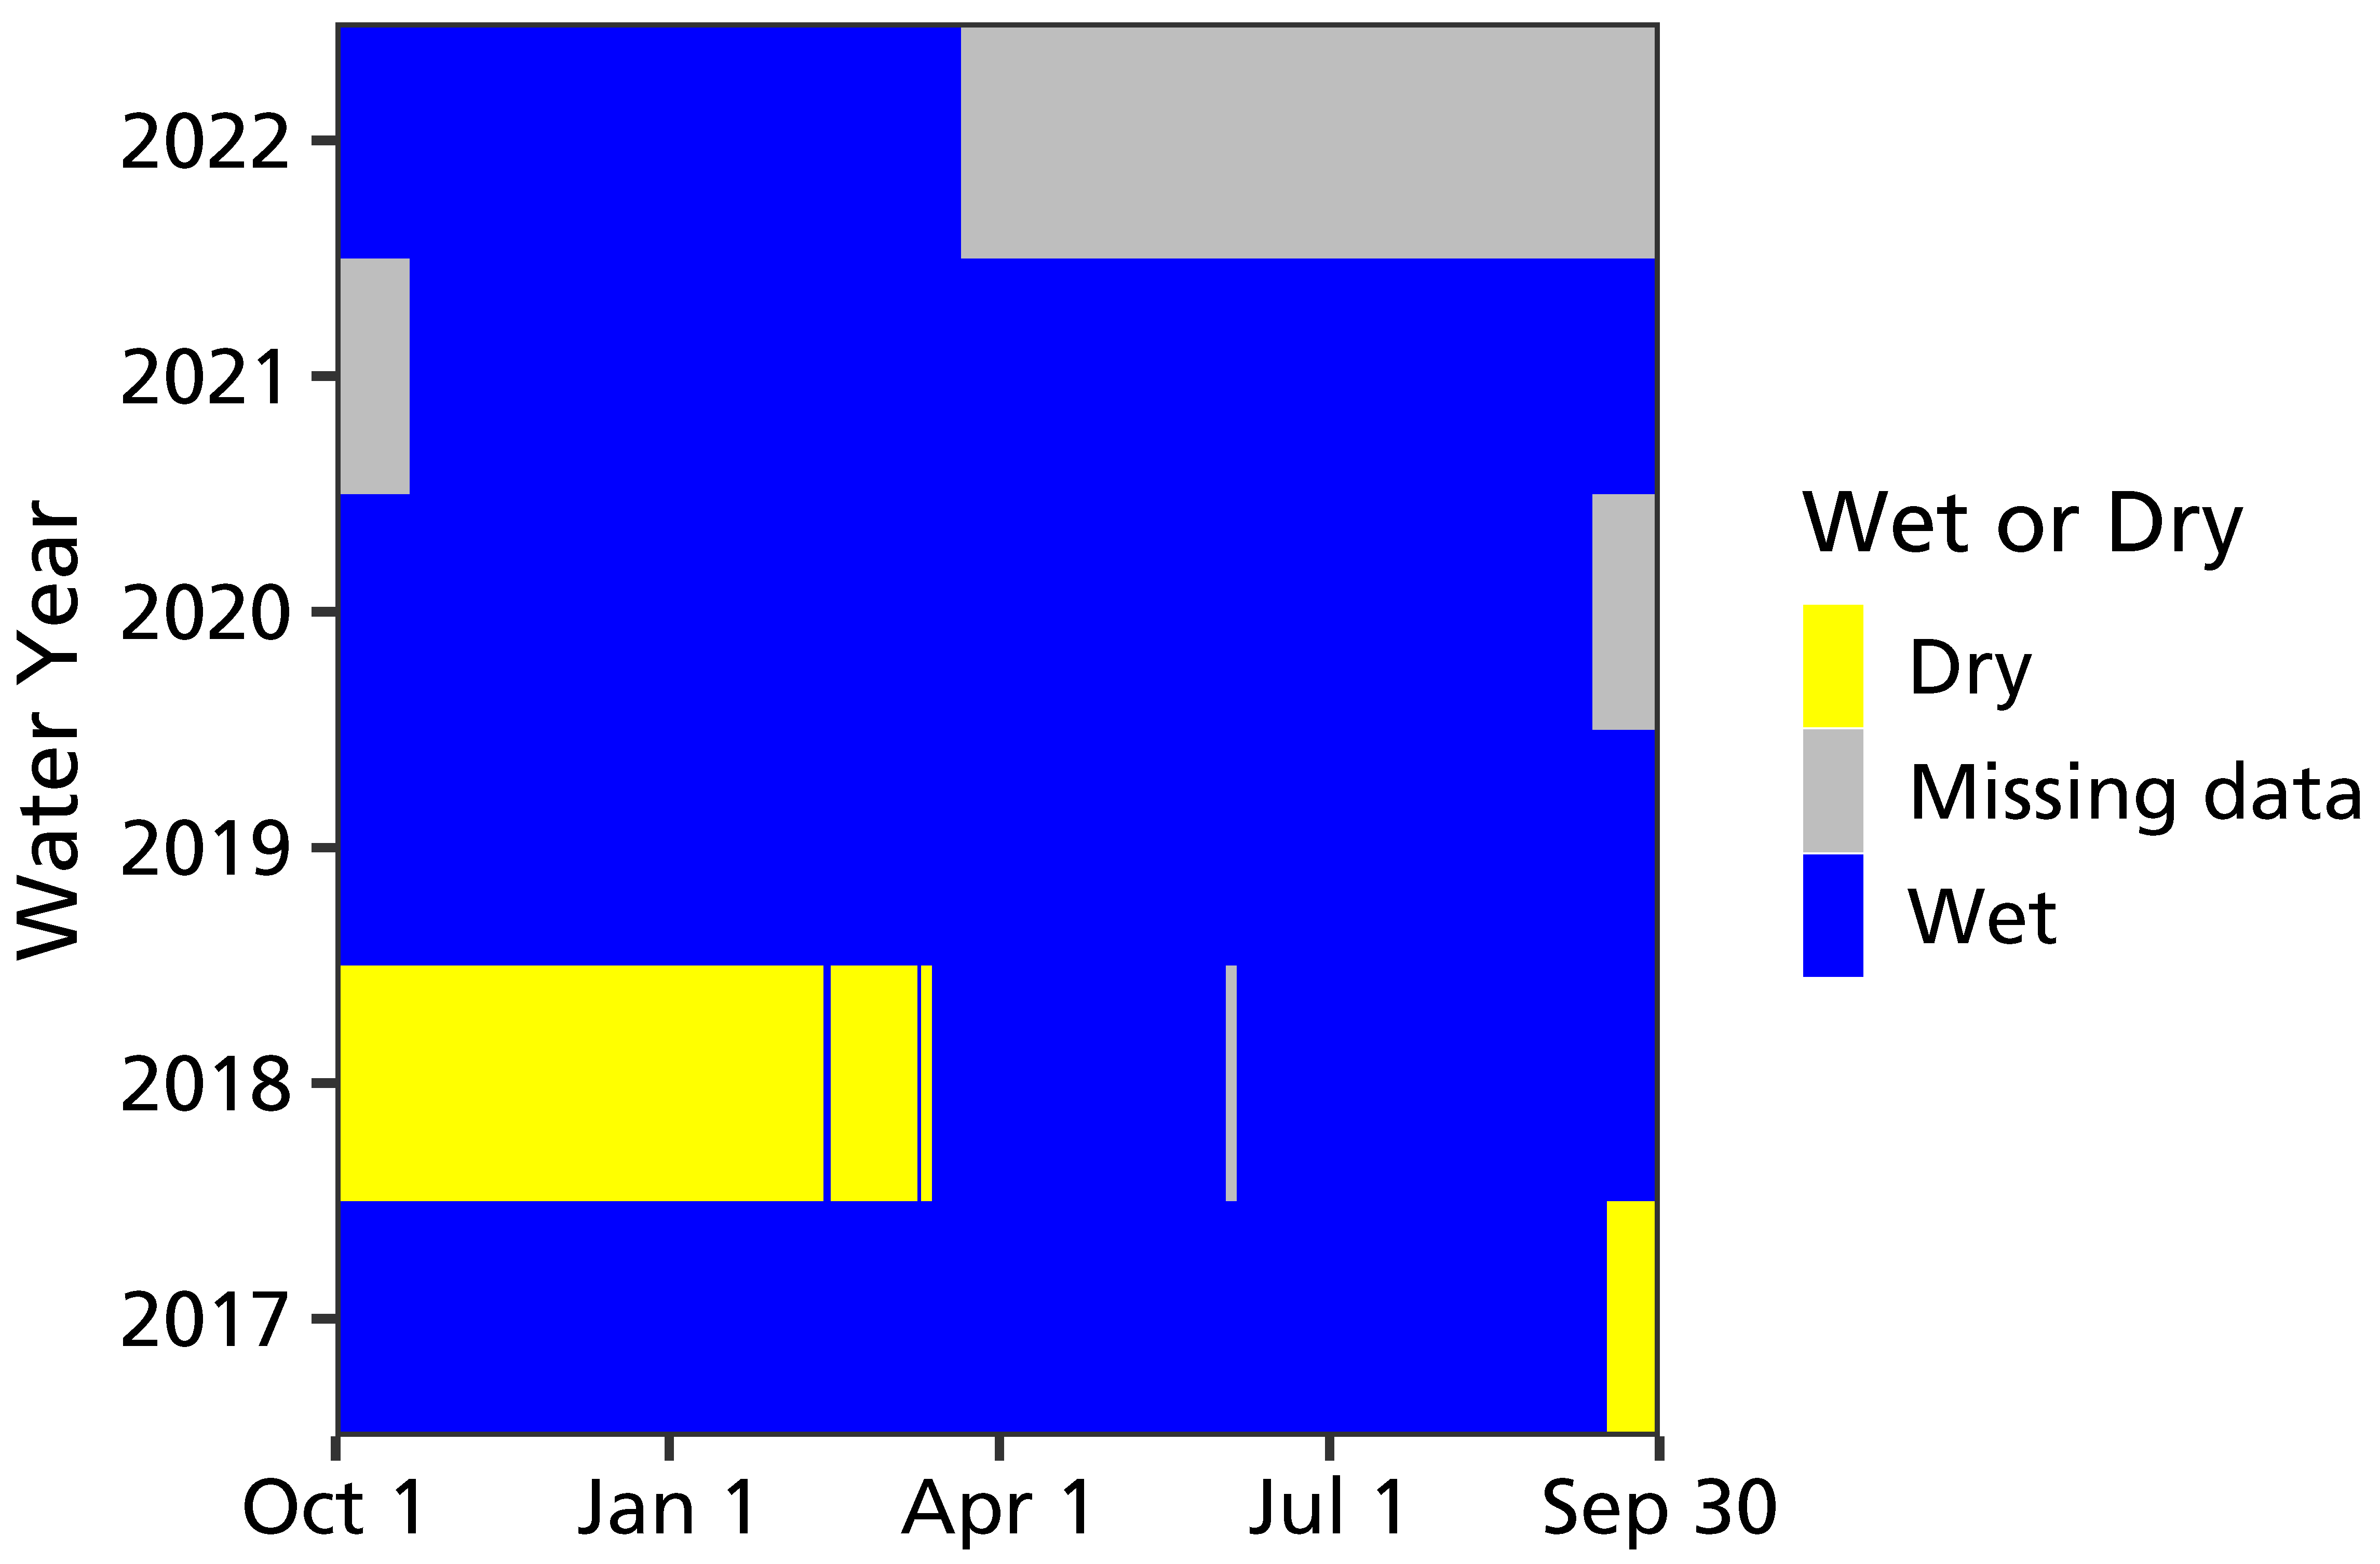 Graph of water persistence showing data for Shea Spring wetness from Water Year 2017 through 2022. Other than a period of missing data from September through October in 2021, the data show Shea Spring being wet besides Sept 2018-Mar 2019.